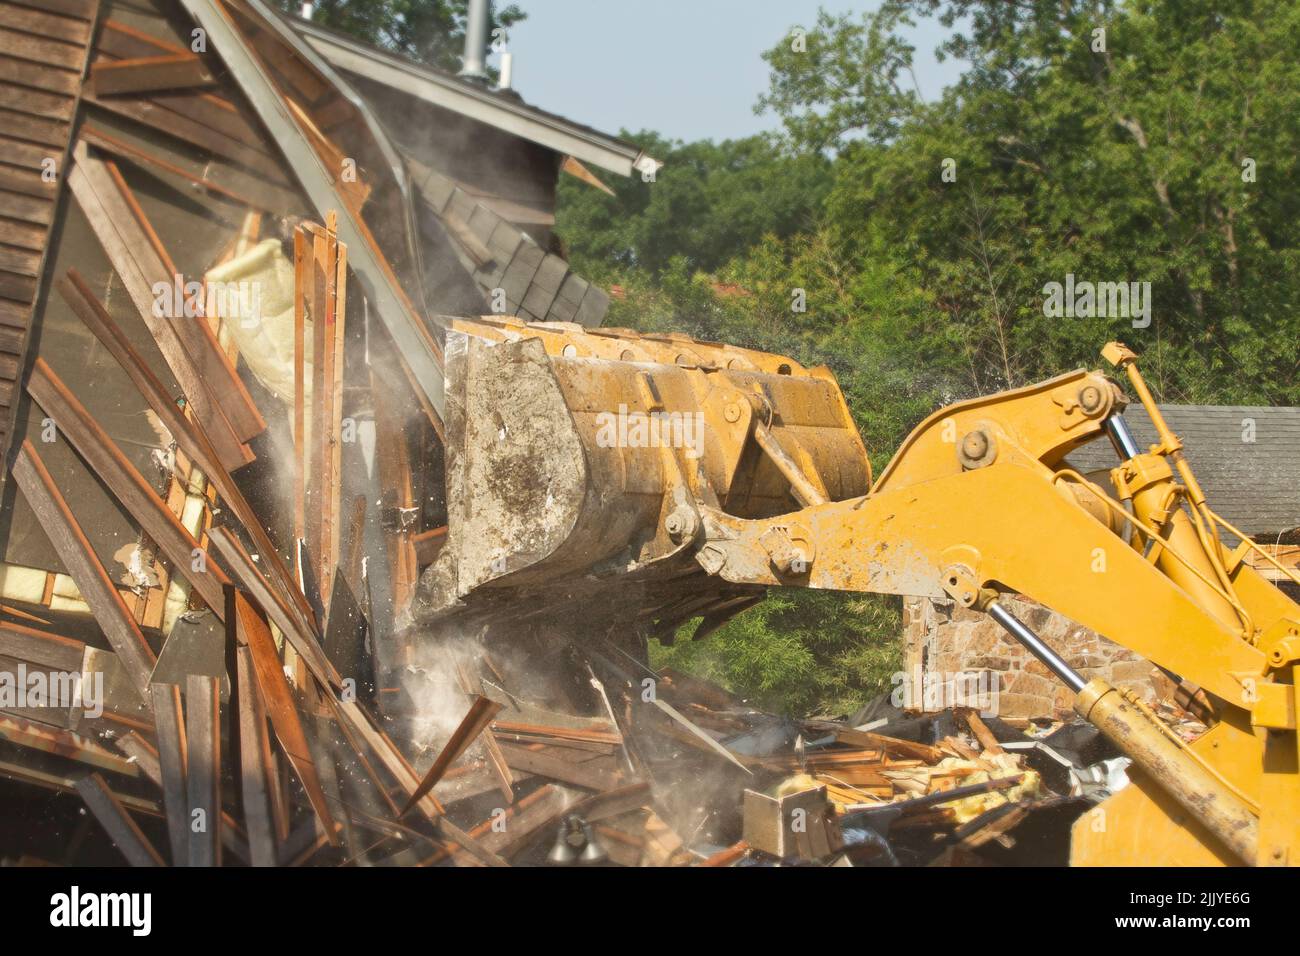 Demolition of residential home with bulldozer preparing for new construction Stock Photo